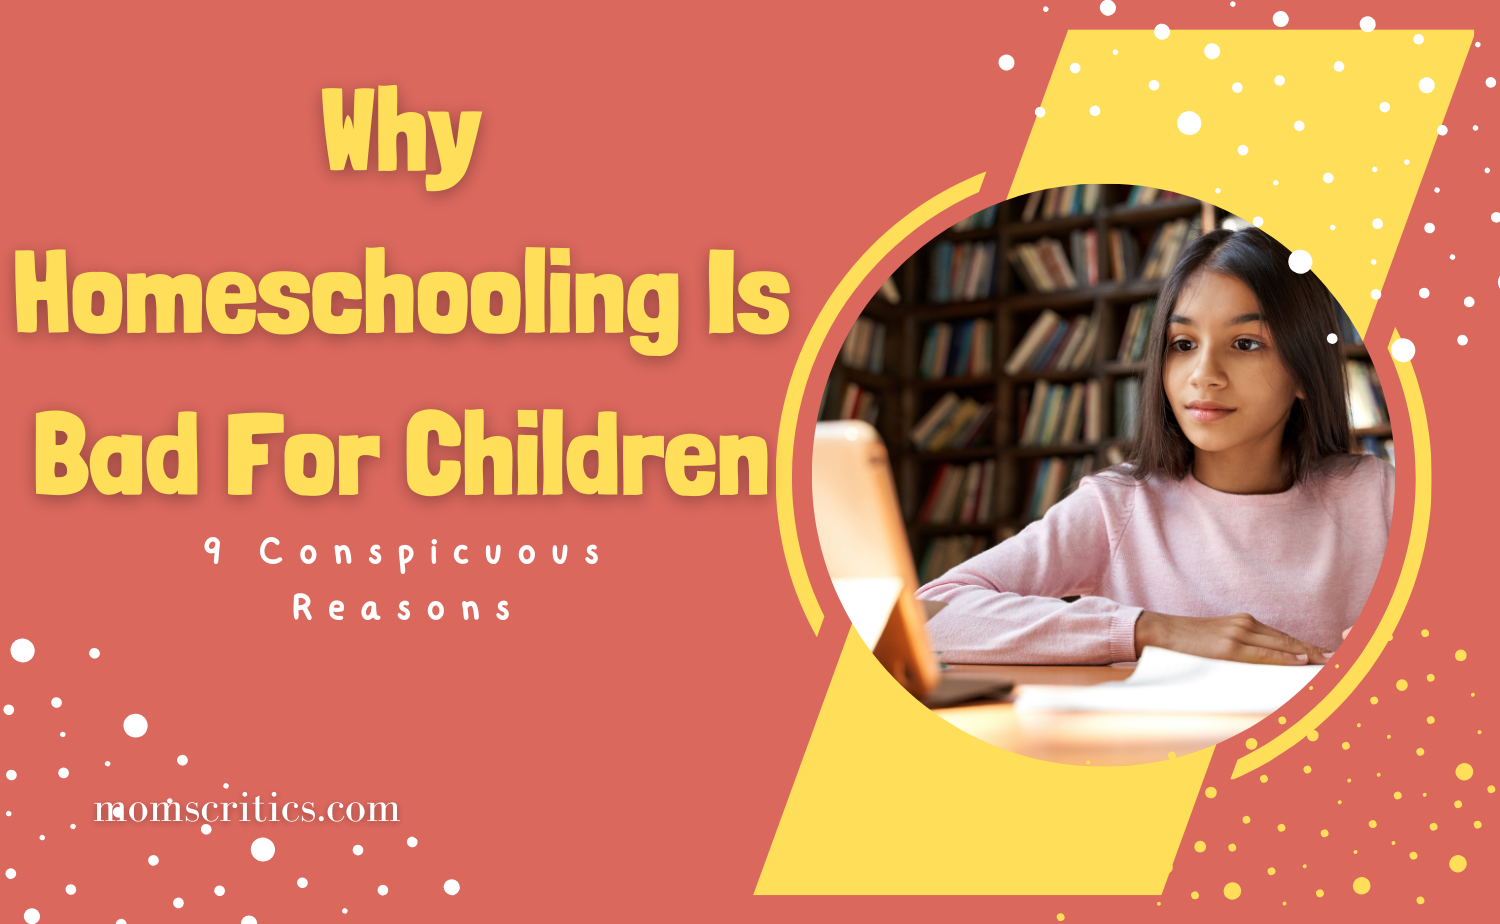 Why Homeschooling Is Bad